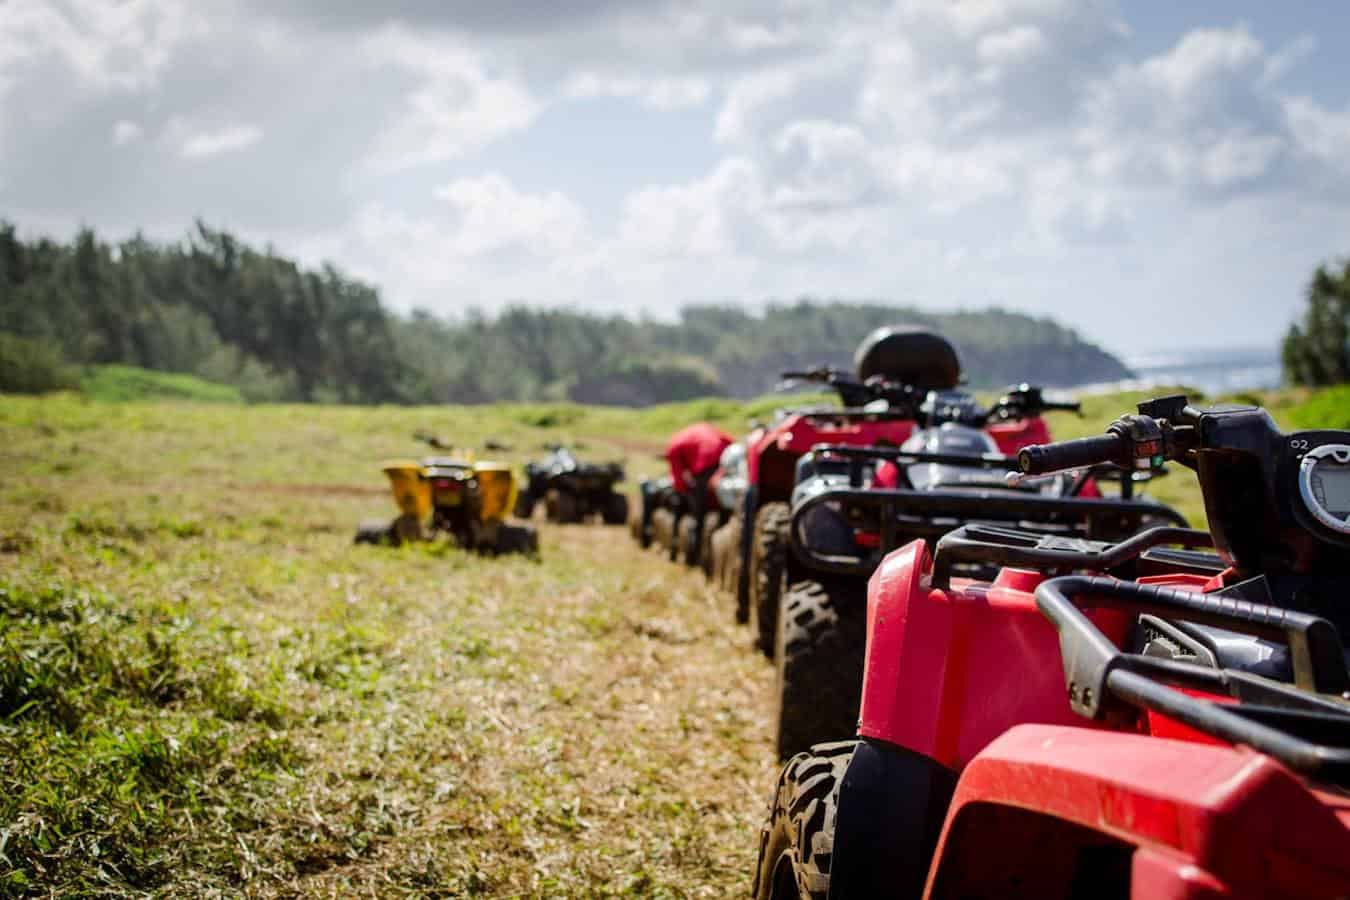 ATVs in a row in a field